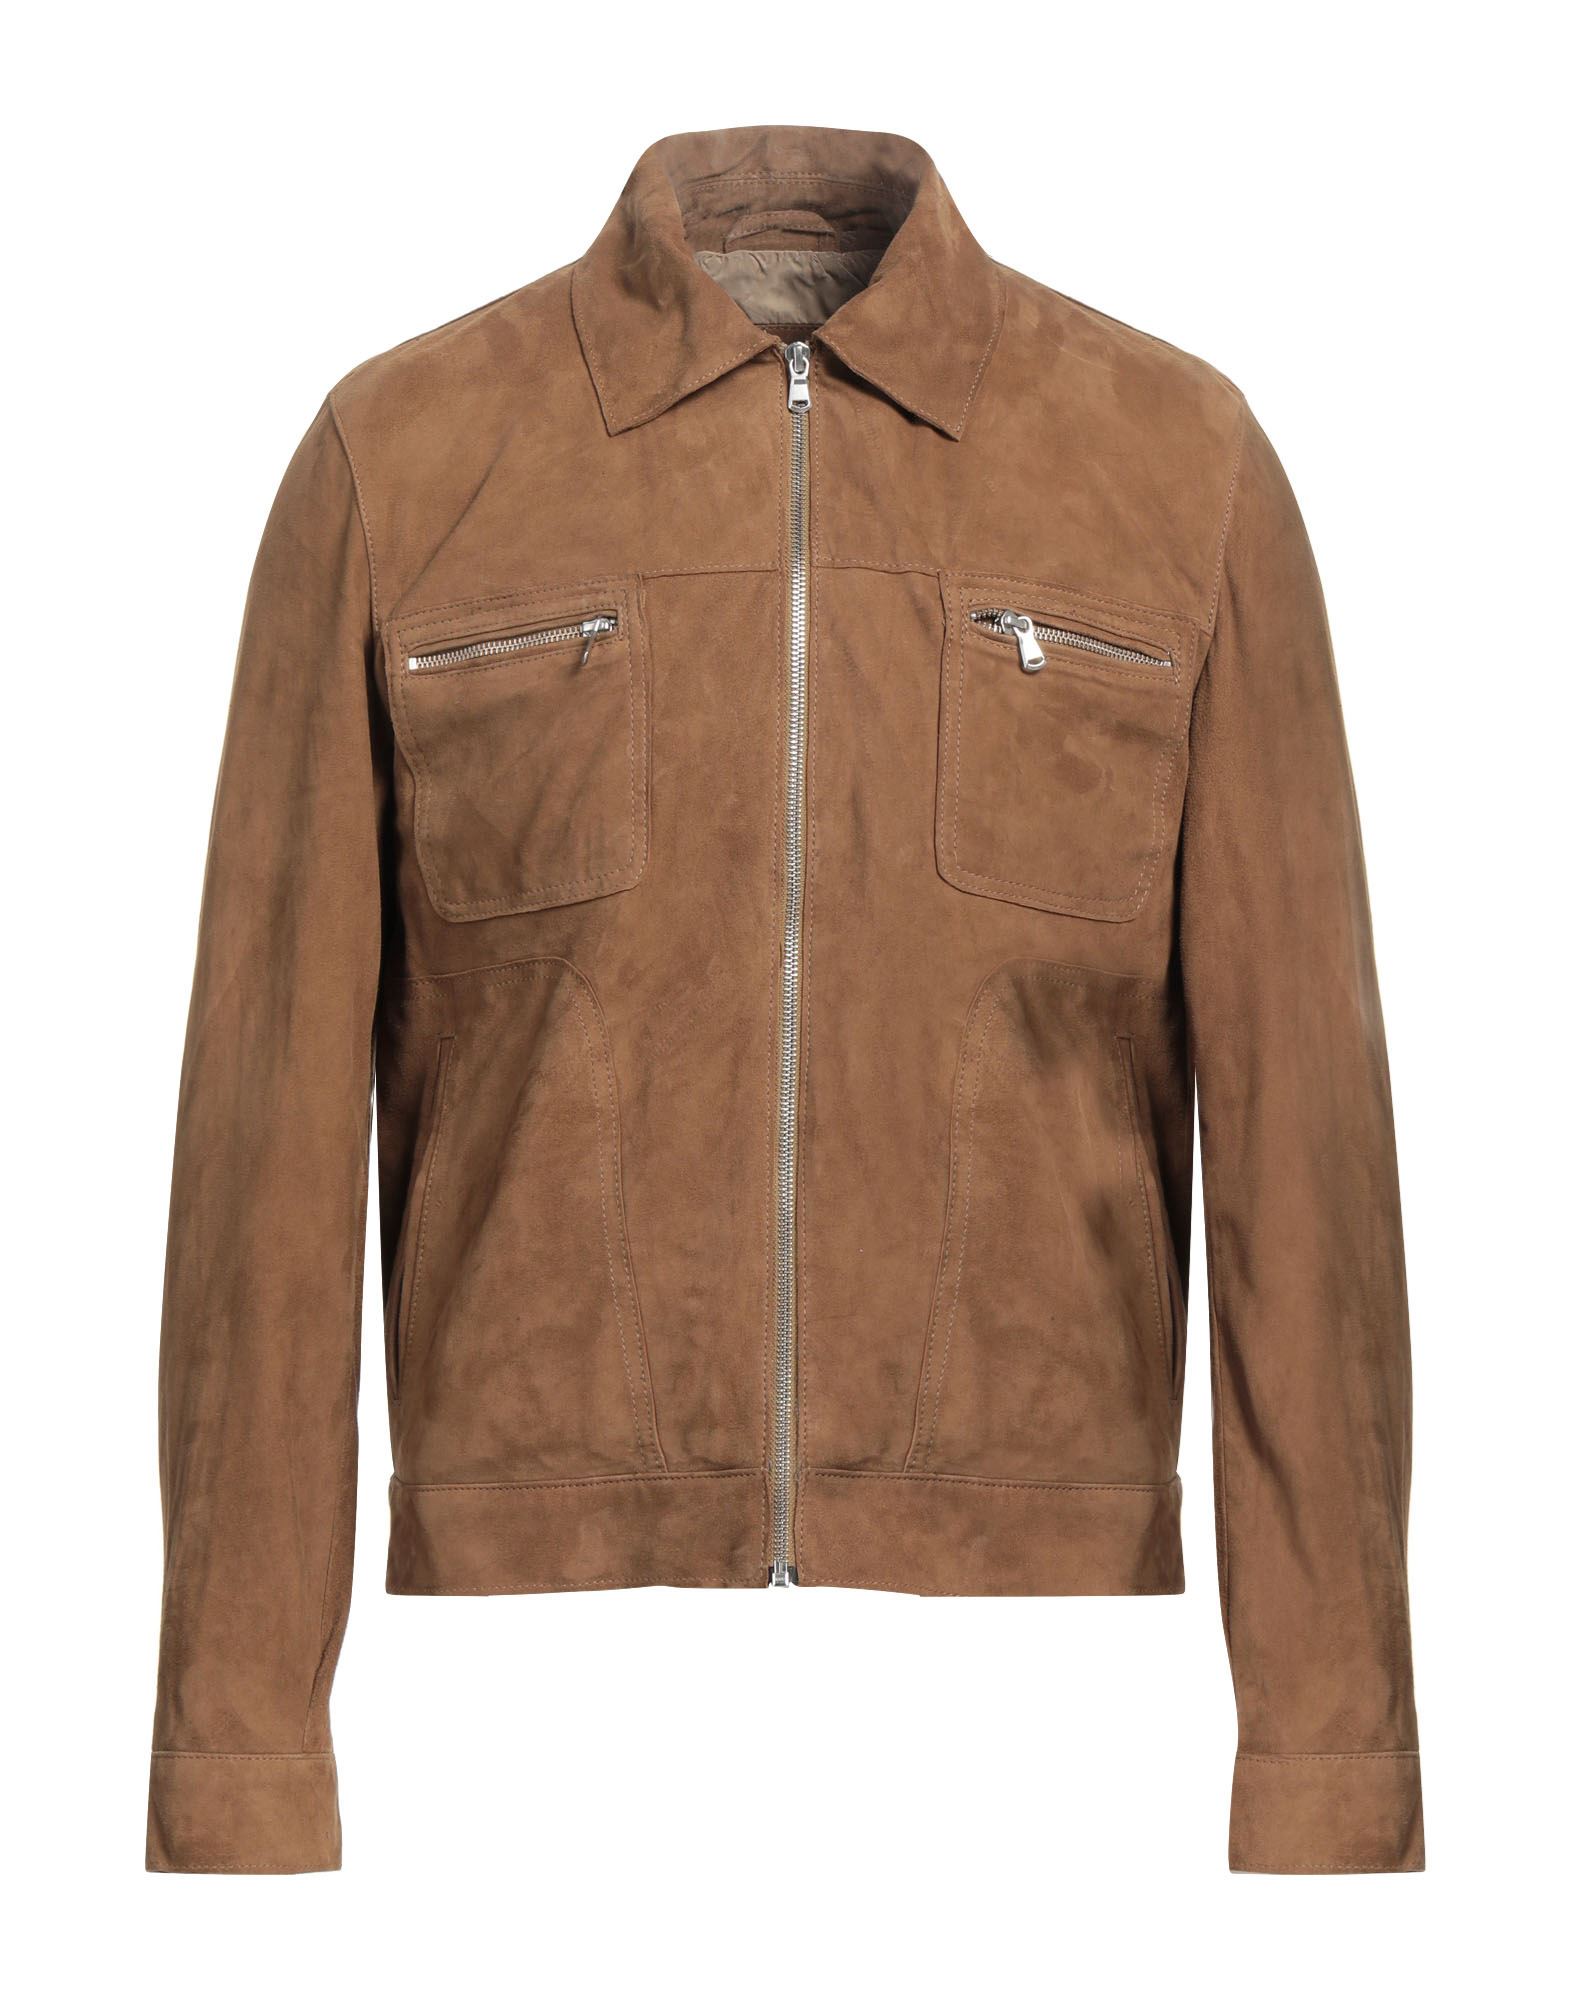 Andrea D'amico Man Jacket Camel Size 48 Leather In Beige